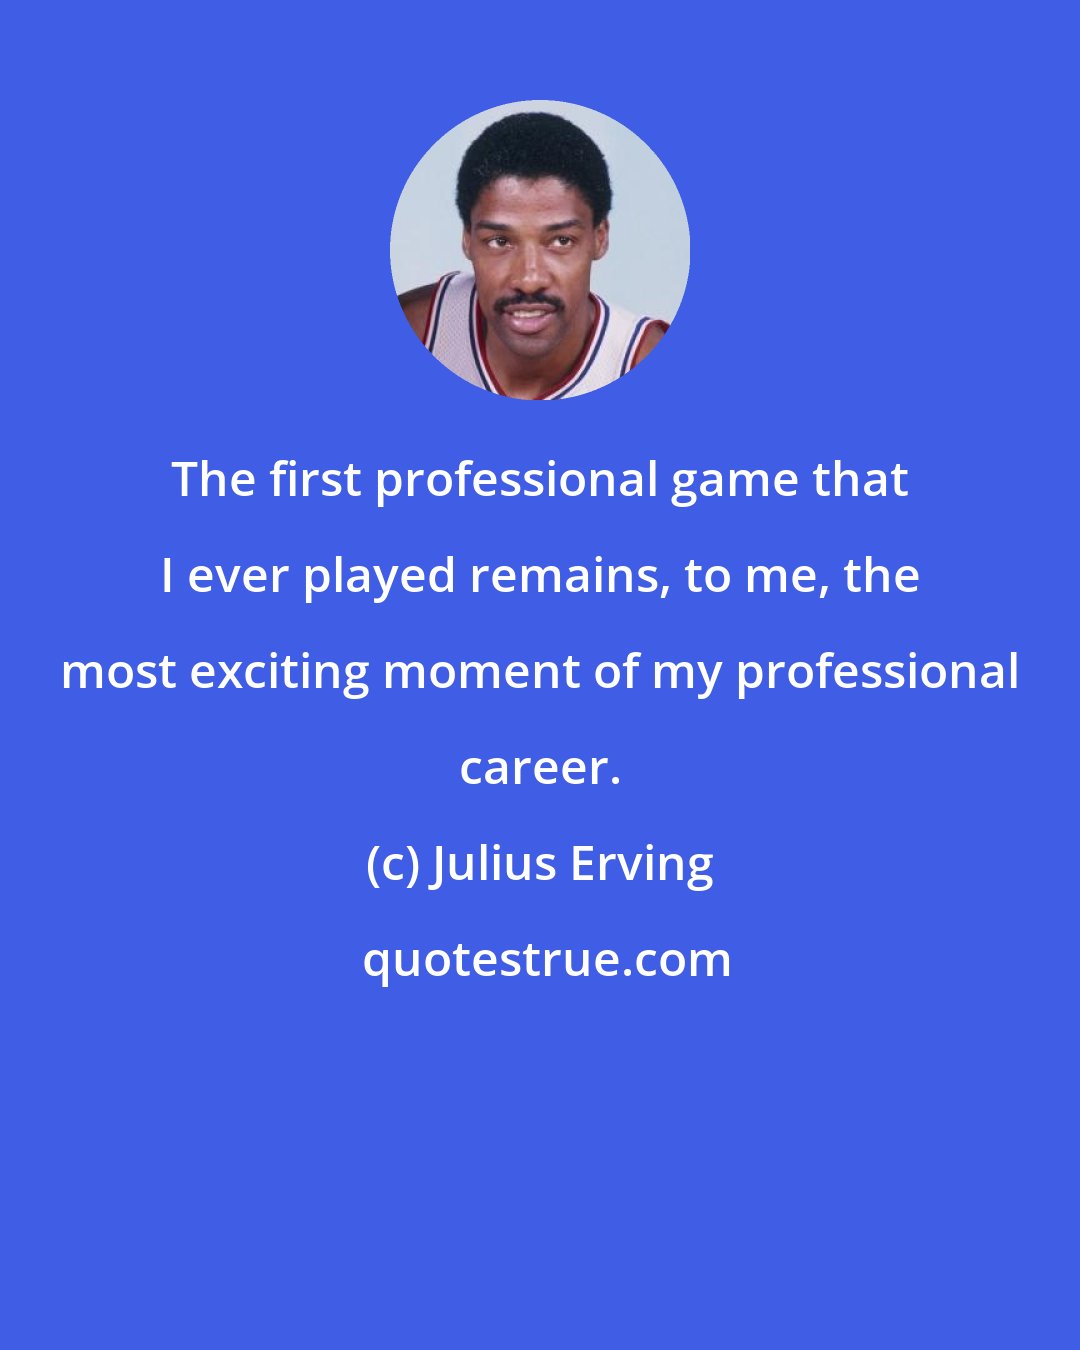 Julius Erving: The first professional game that I ever played remains, to me, the most exciting moment of my professional career.